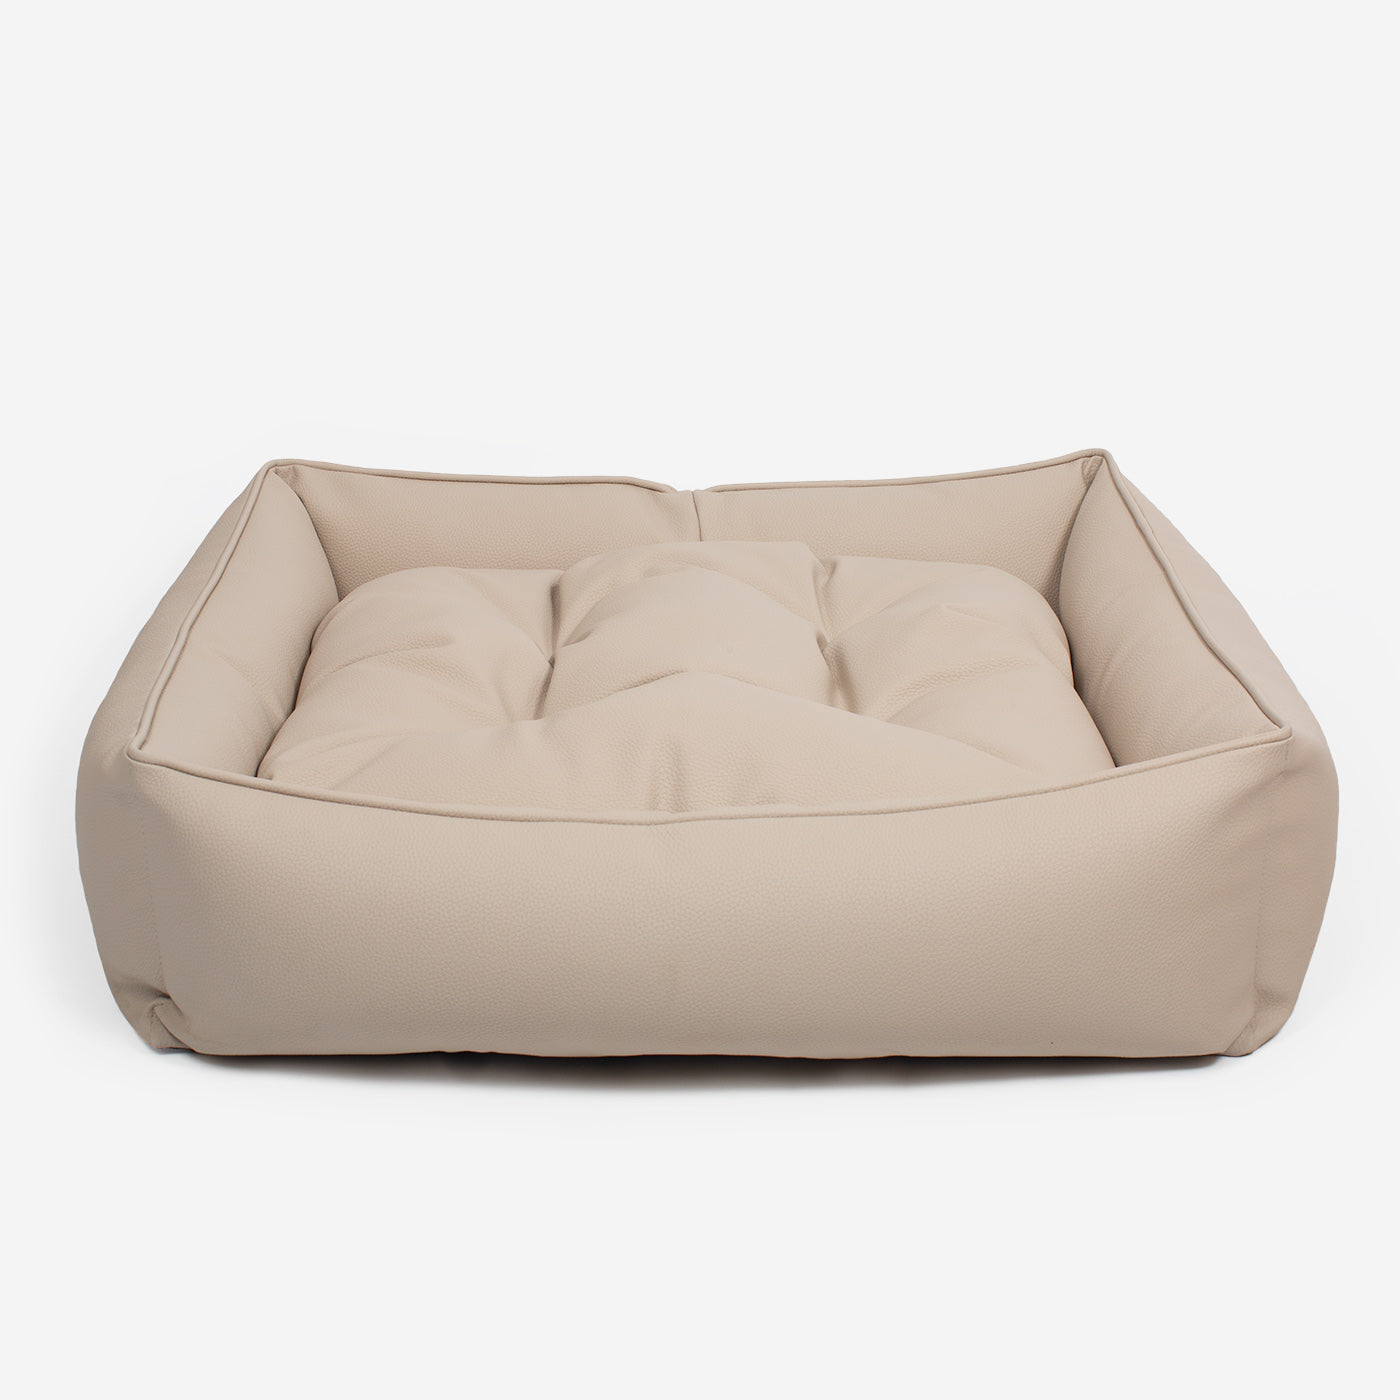 [color:sand] Luxury Handmade Box Bed in Rhino Tough Desert Faux Leather, in Sand, Perfect For Your Pets Nap Time! Available To Personalize at Lords & Labradors US